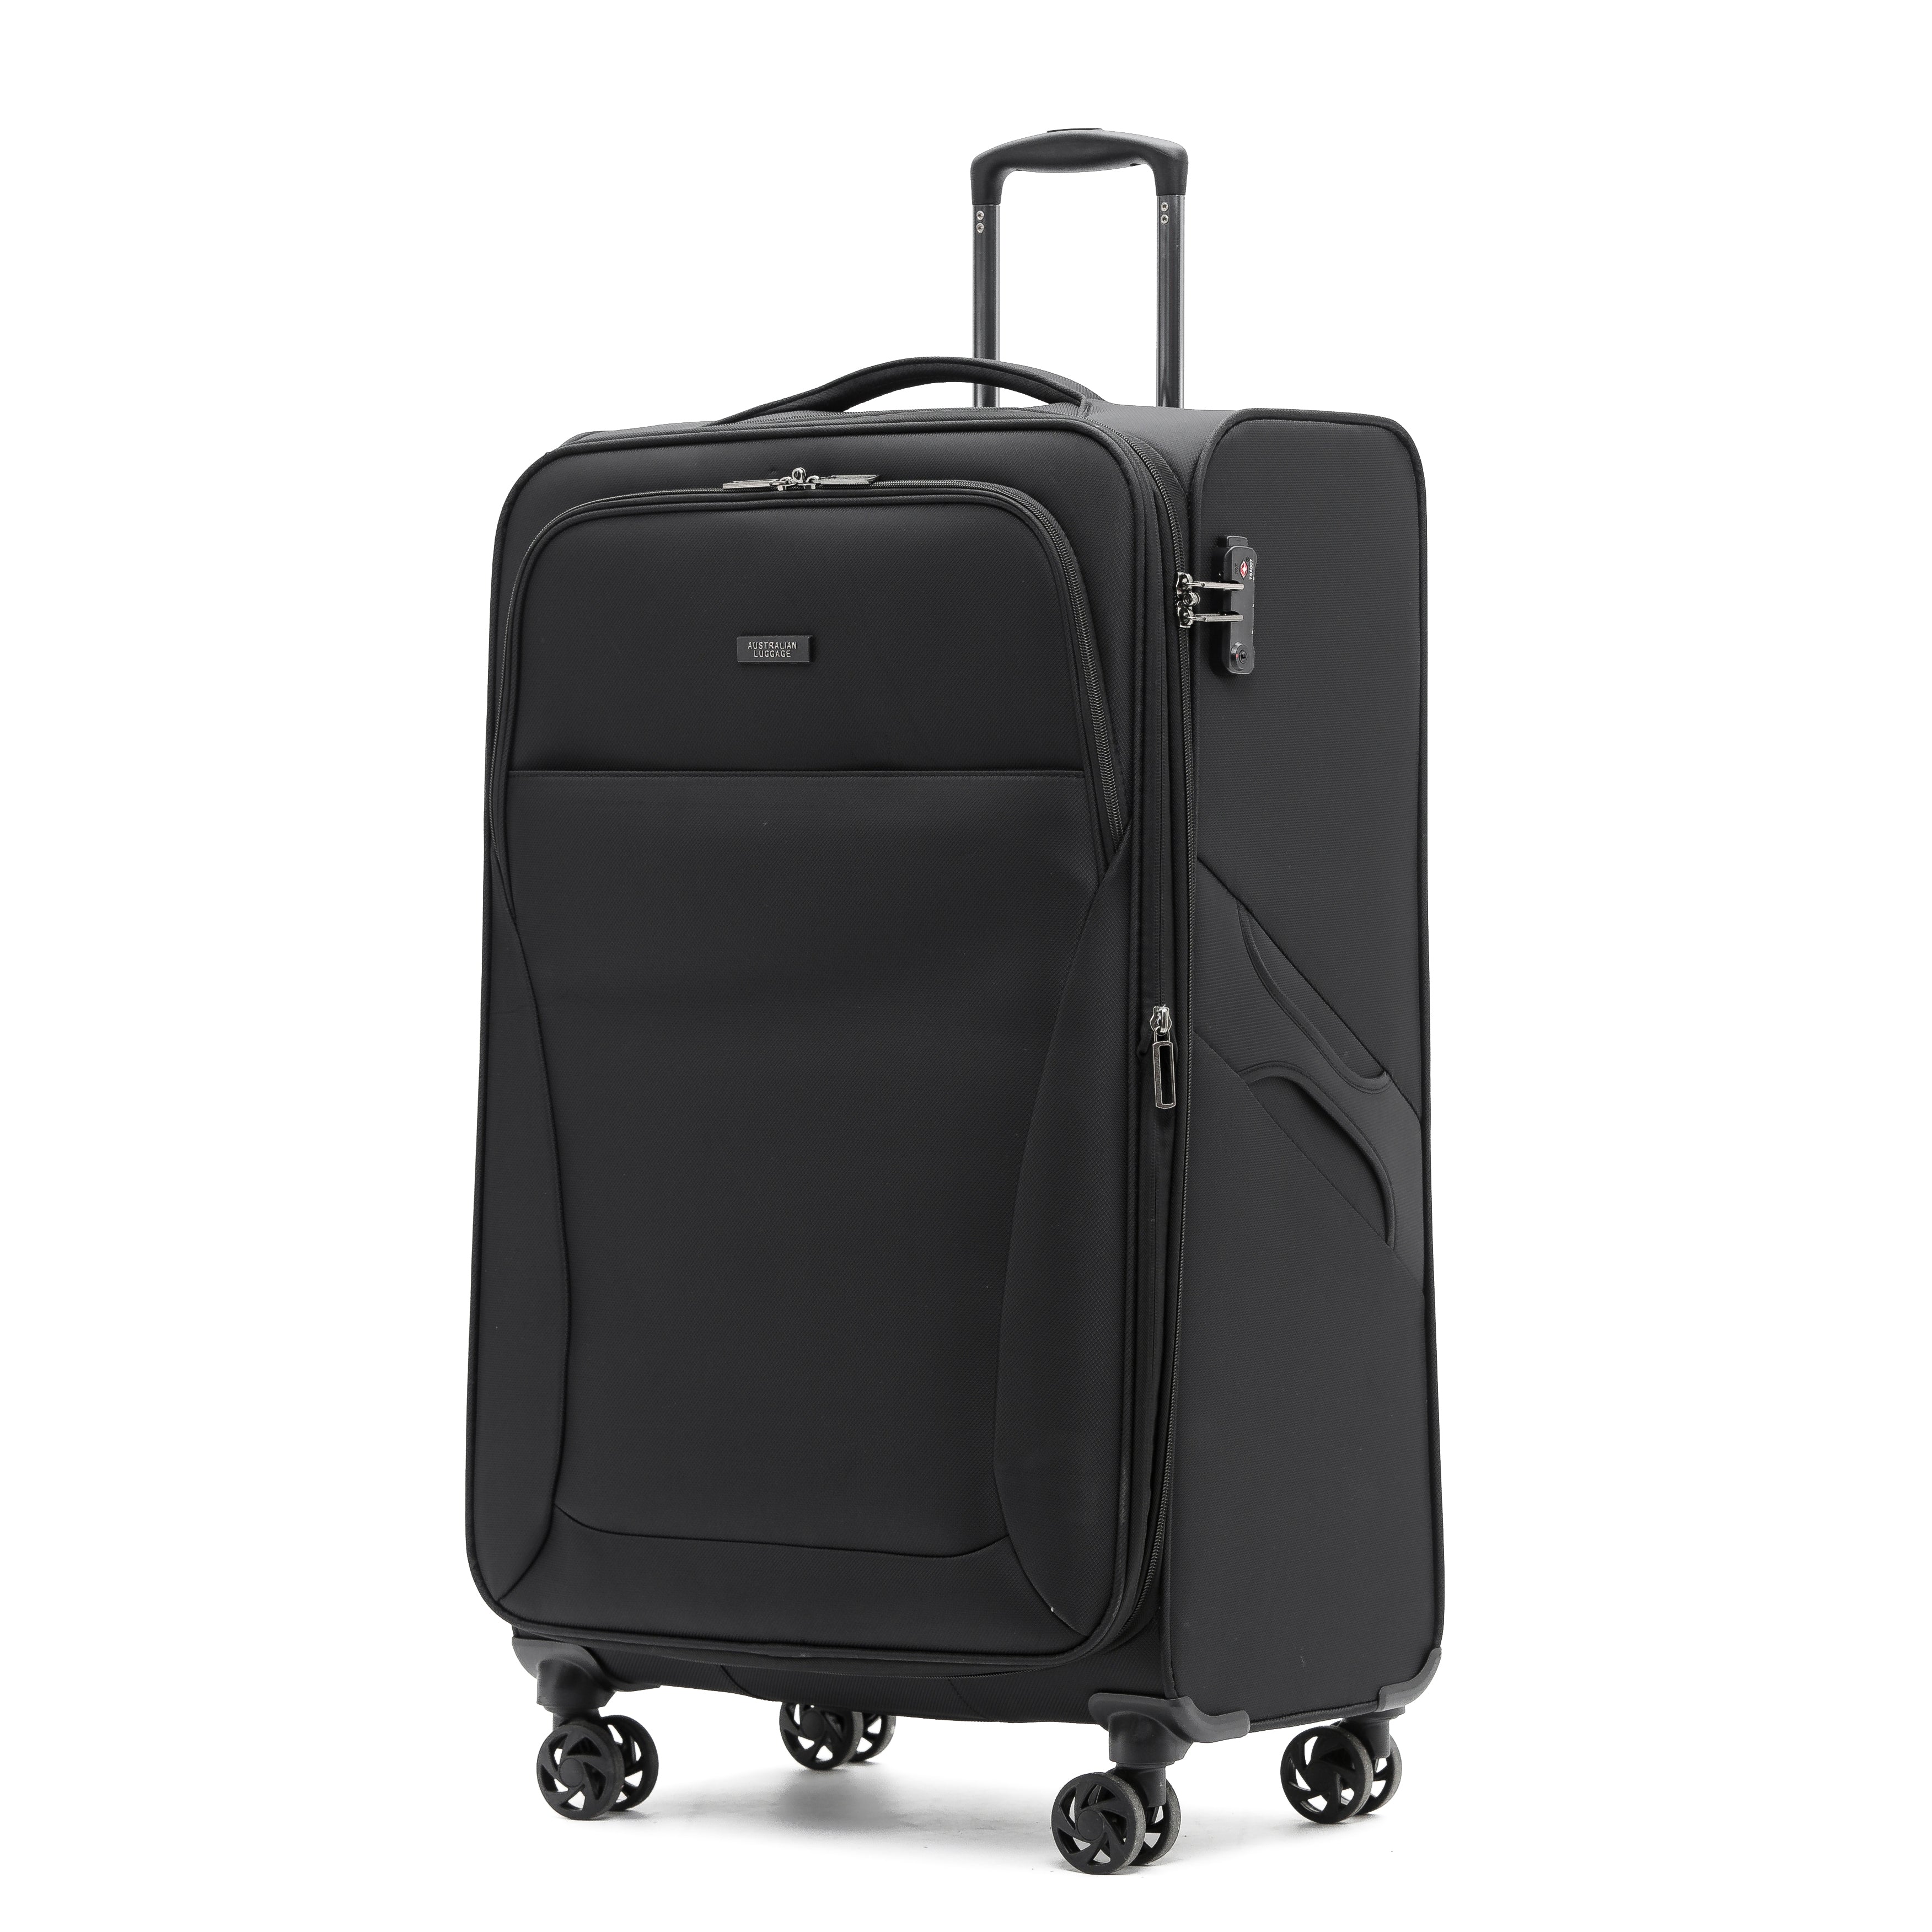 AUS LUGGAGE - WINGS Trolley Case 29in Large - BLACK - 0